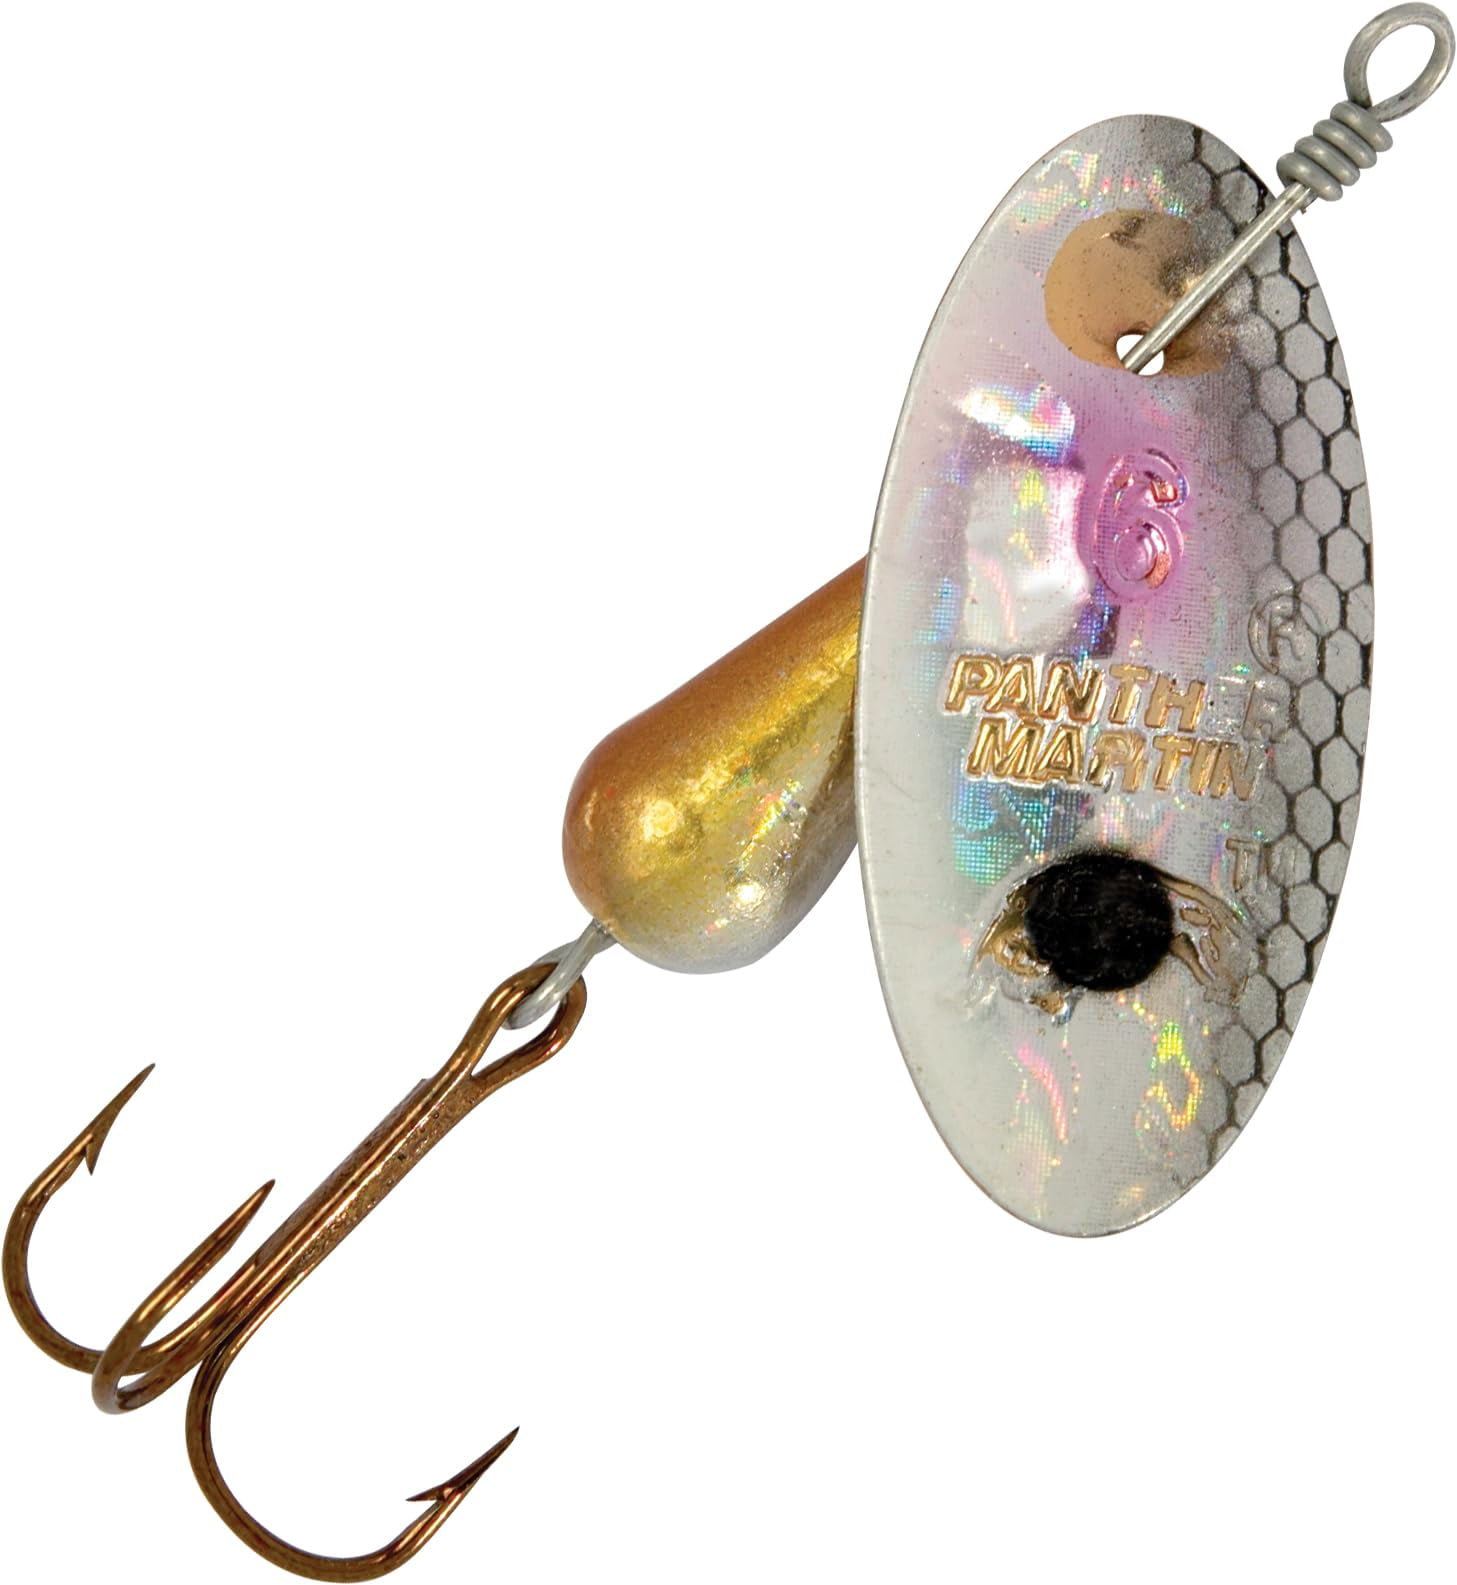 Panther Martin PMH_2_RTH Classic Holographic Spinners Fishing Lure -  Rainbow Trout Holographic - 2 (1/16 oz) 